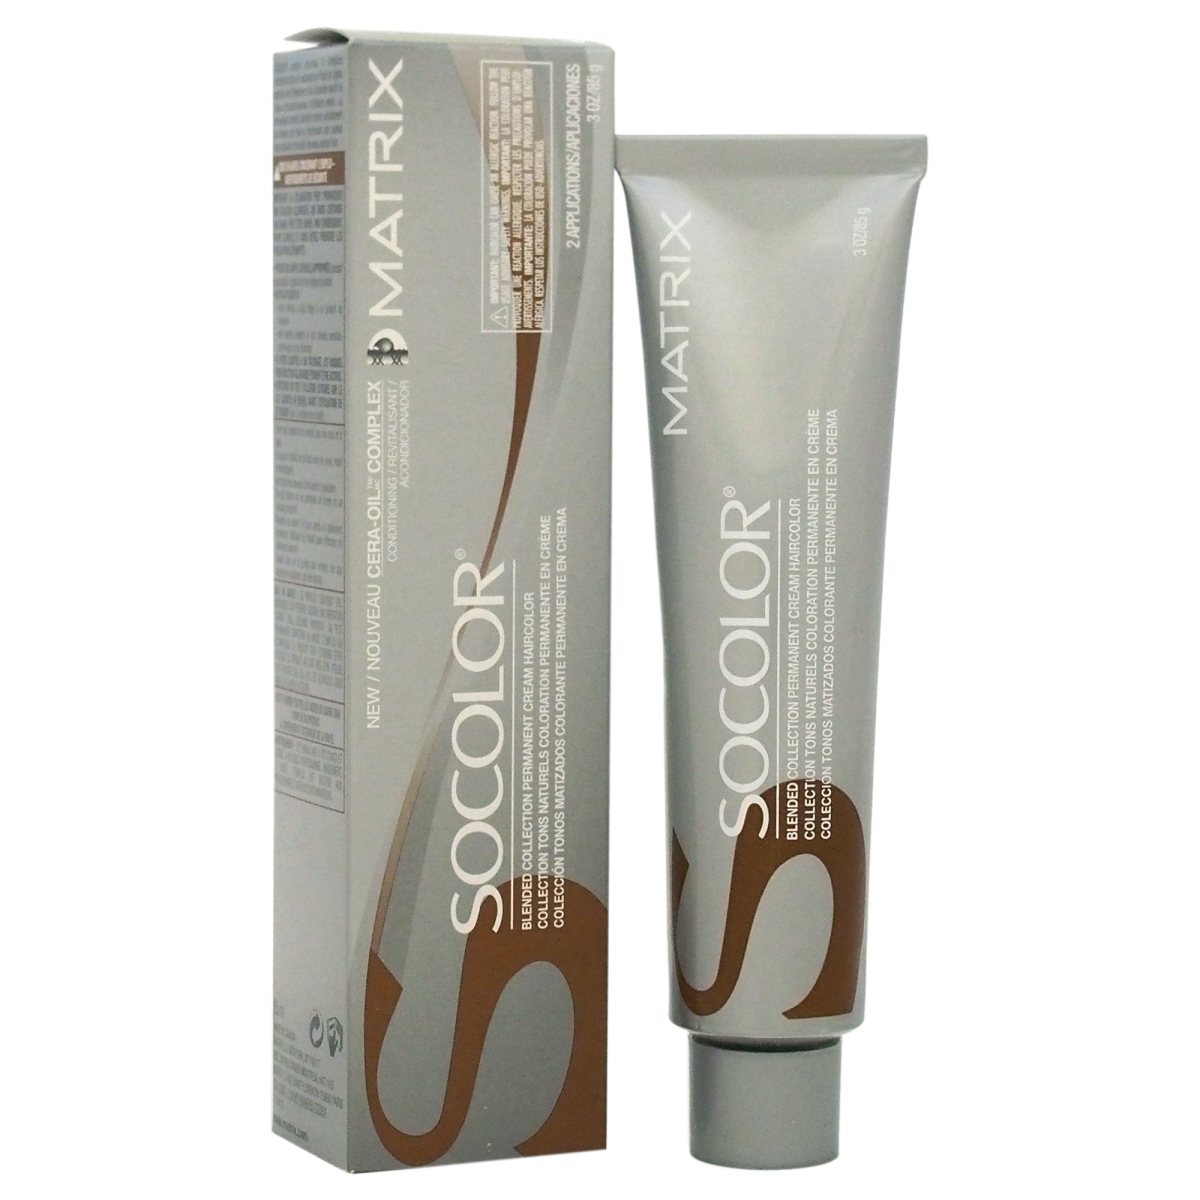 U-hc-8331 3 Oz Socolor Permanent Cream Hair Color, 6n Neutral By Hair Color For Unisex - Light Brown